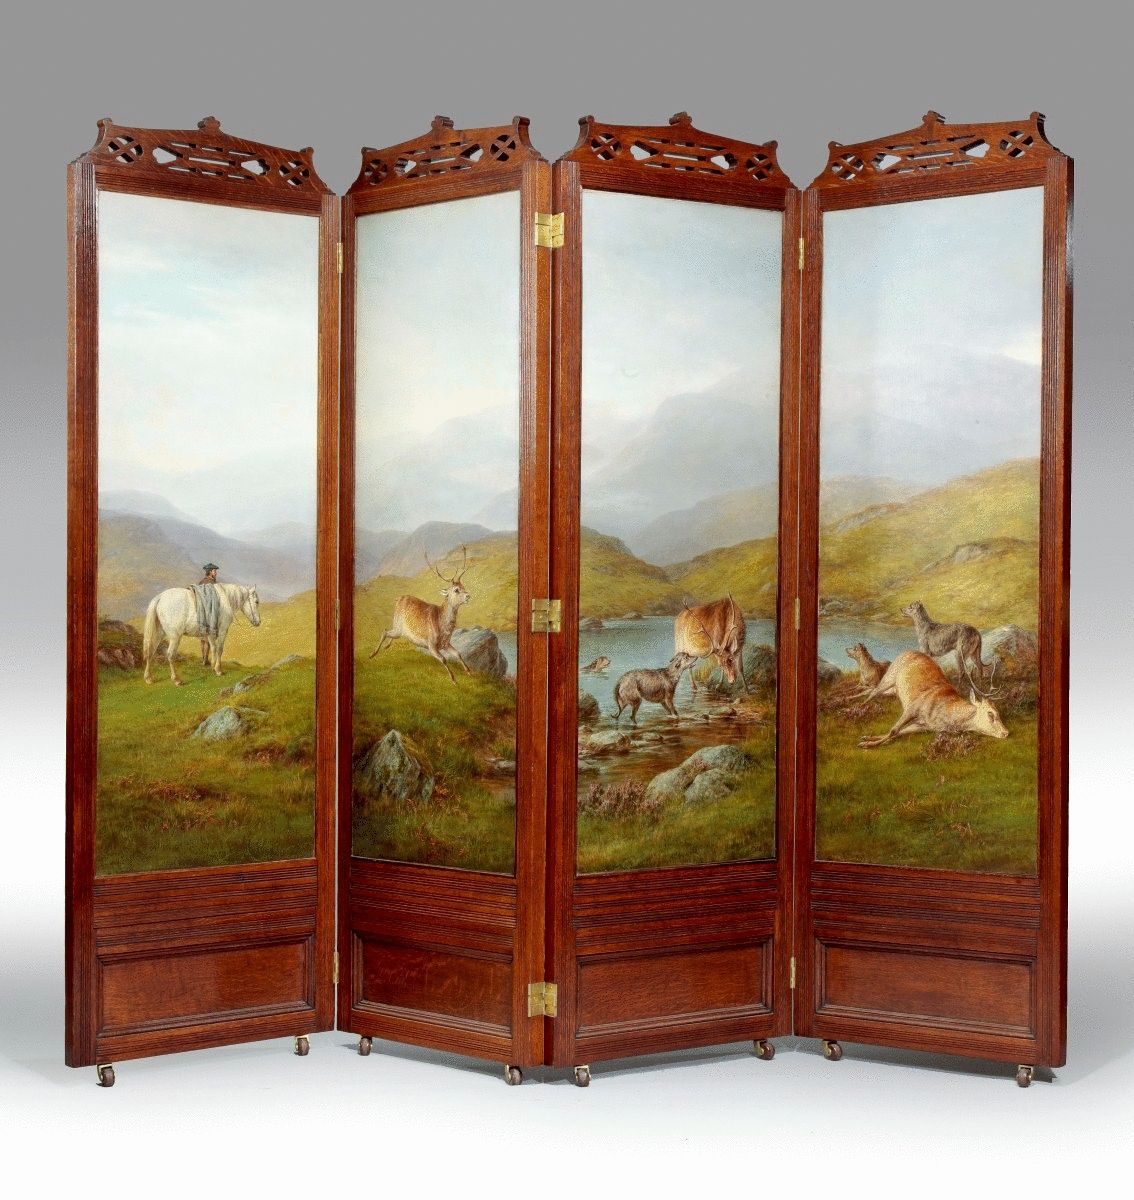 Wooden Folding Screen with Animal Print